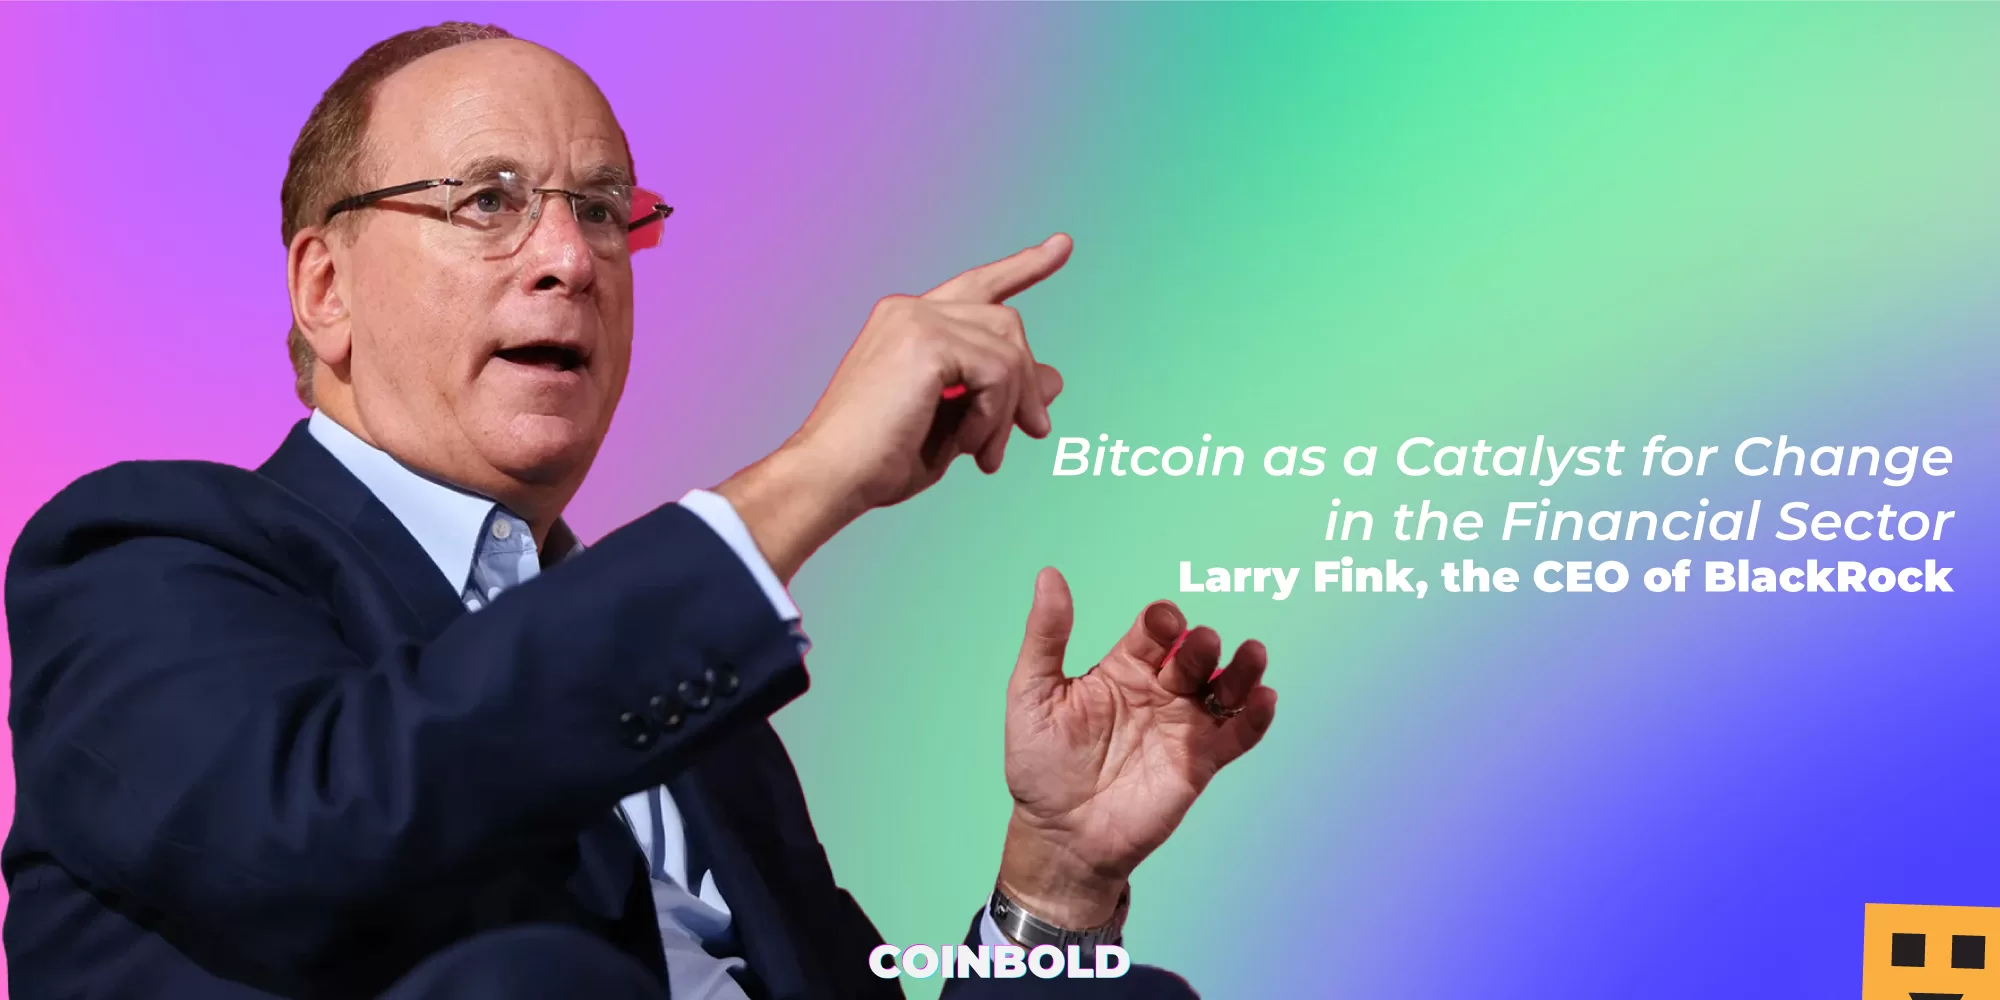 Larry Fink of BlackRock Sees Bitcoin as a Catalyst for Change in the Financial Sector